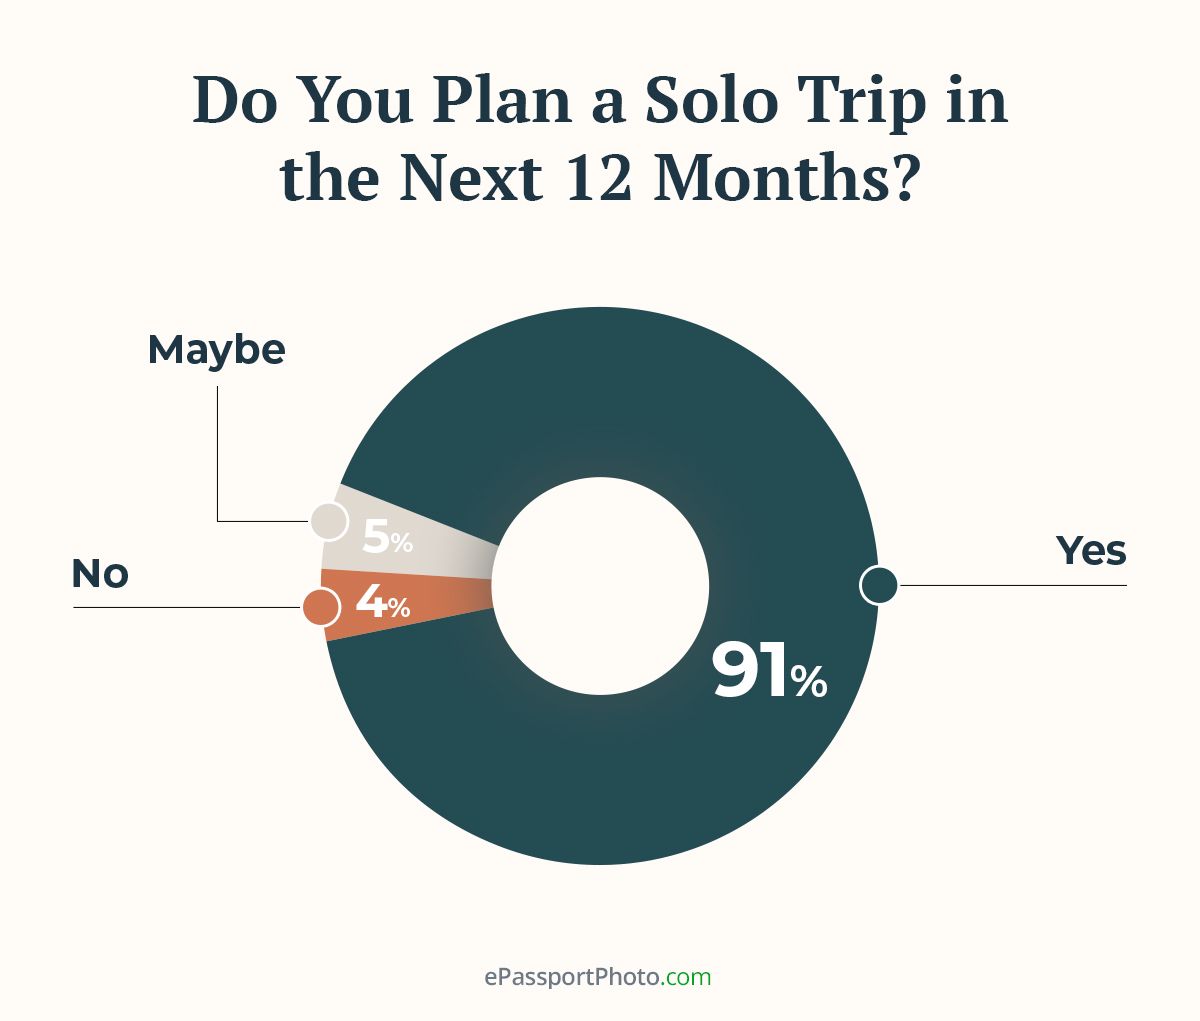 91% of Americans who’ve gone solo in the past intend to travel solo again in the next 12 months